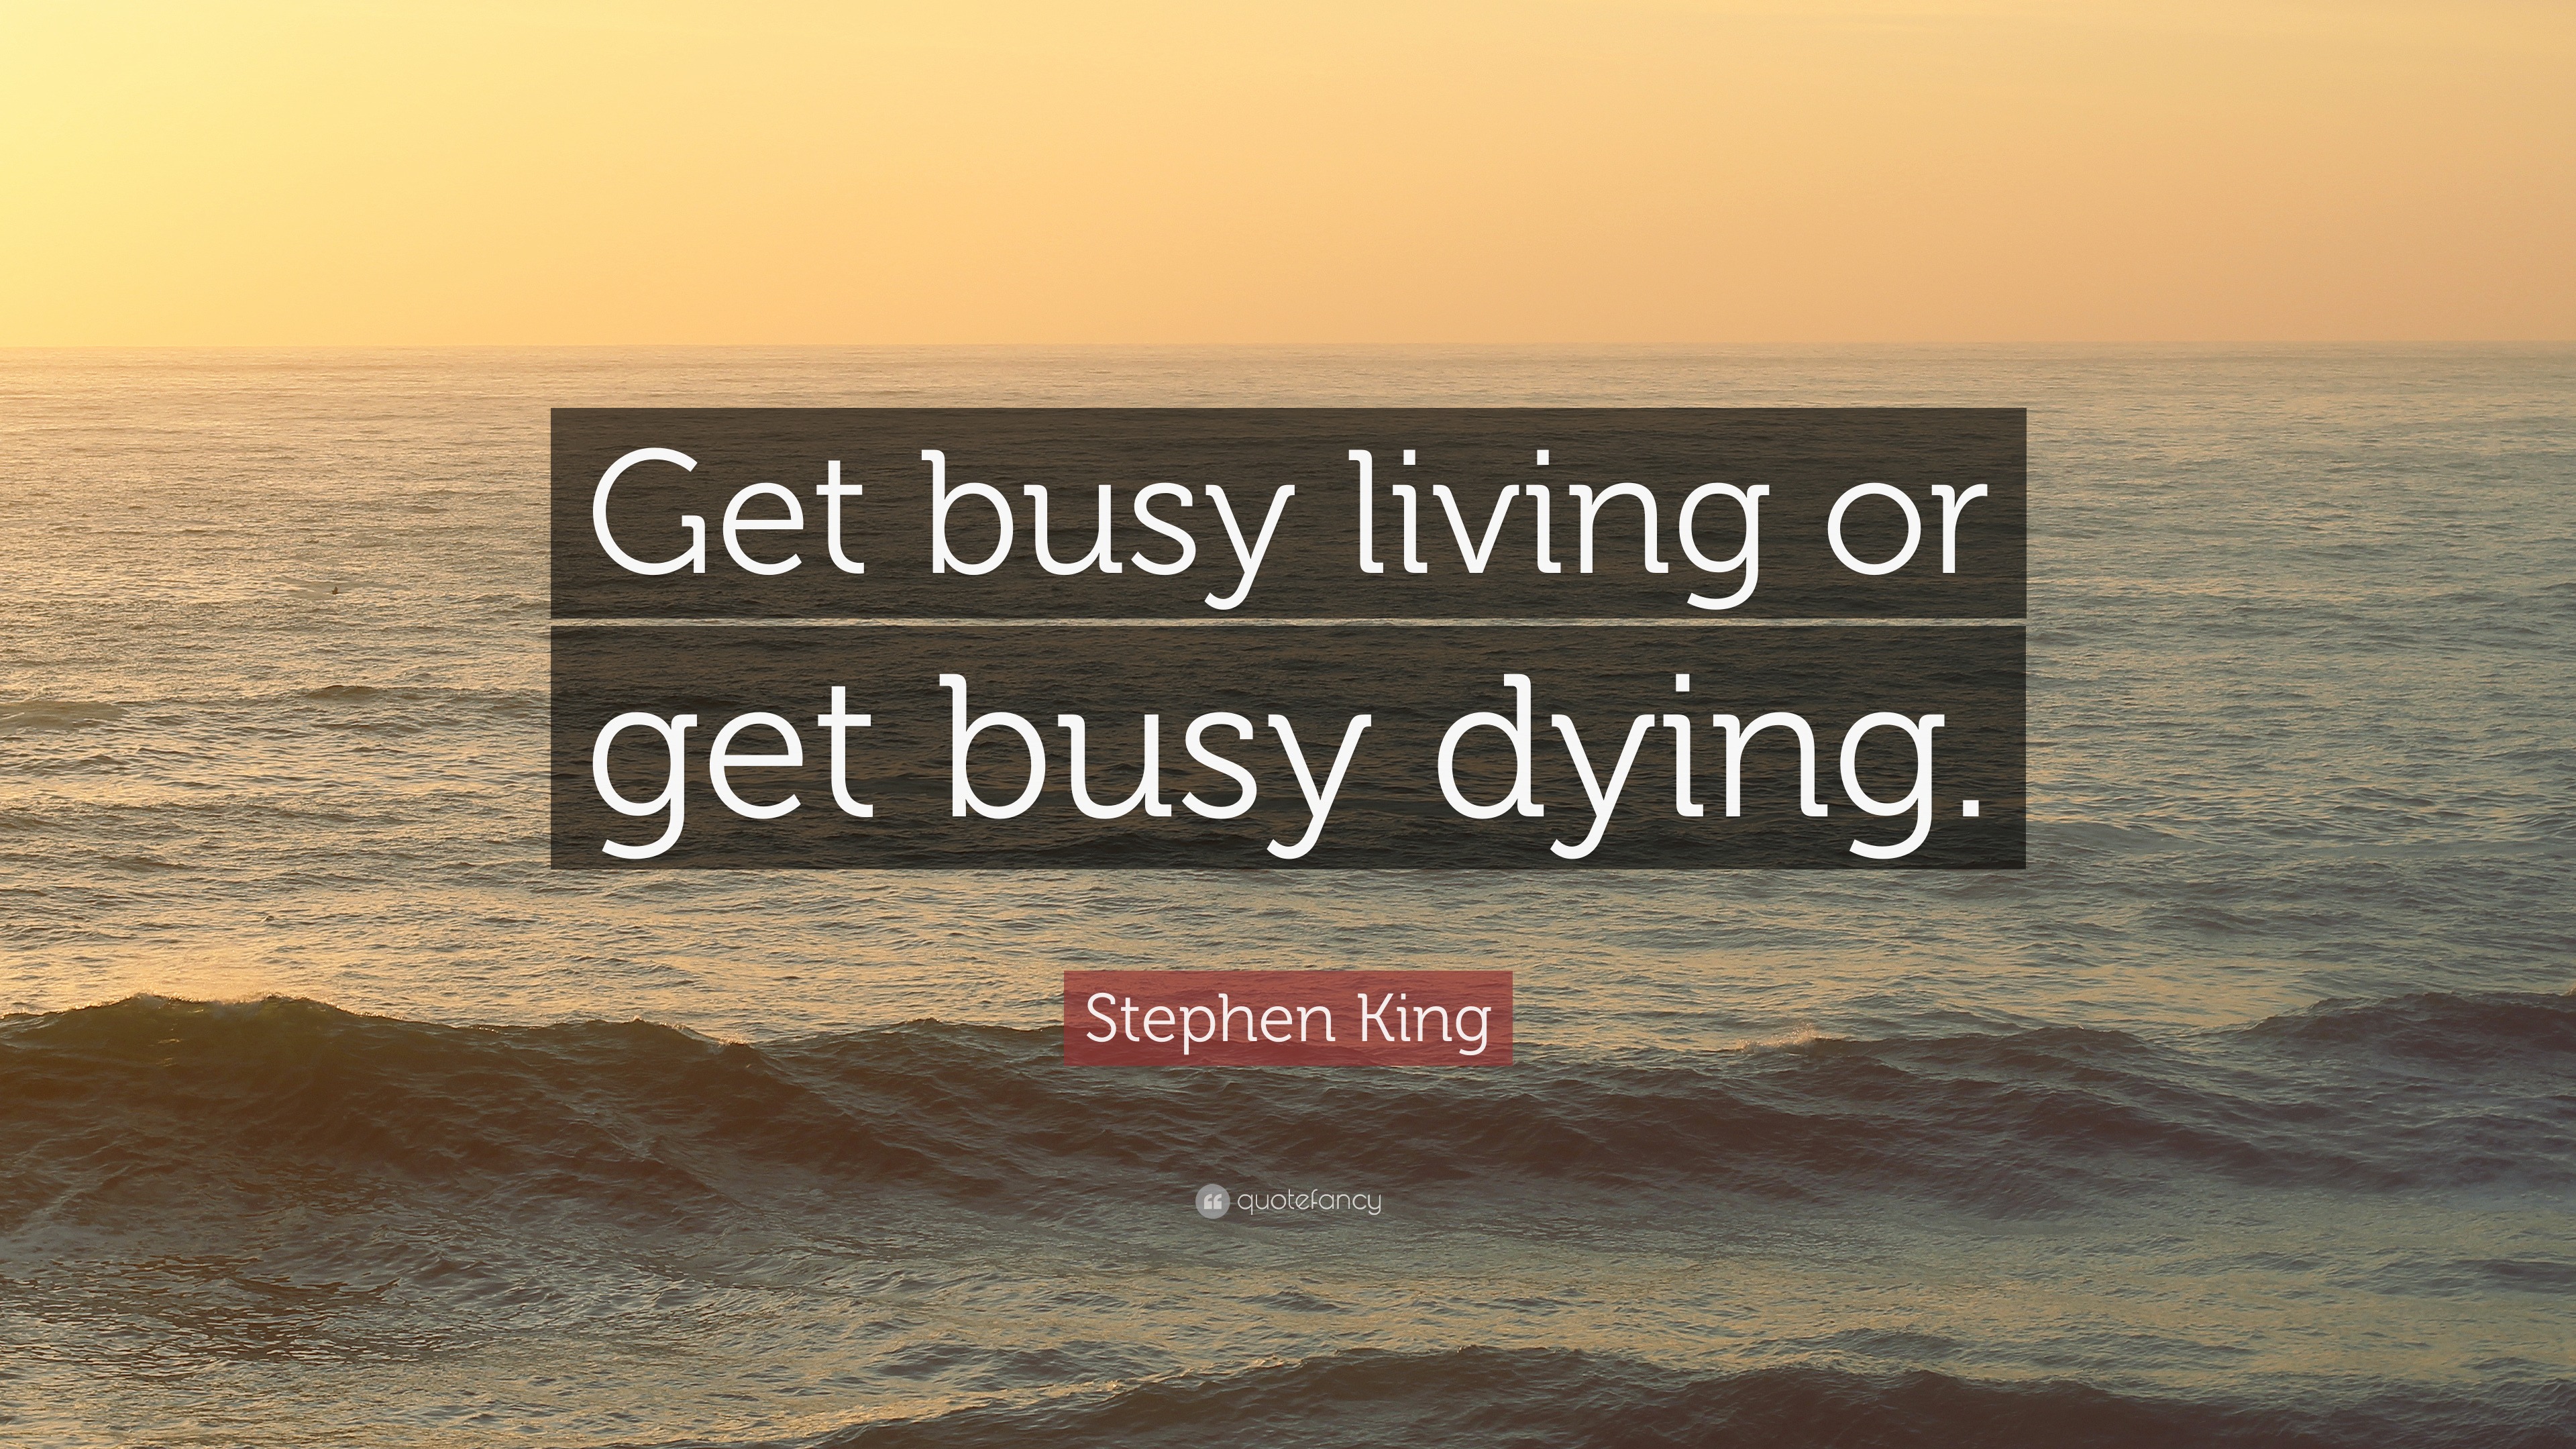 Stephen King Quote: "Get busy living or get busy dying."